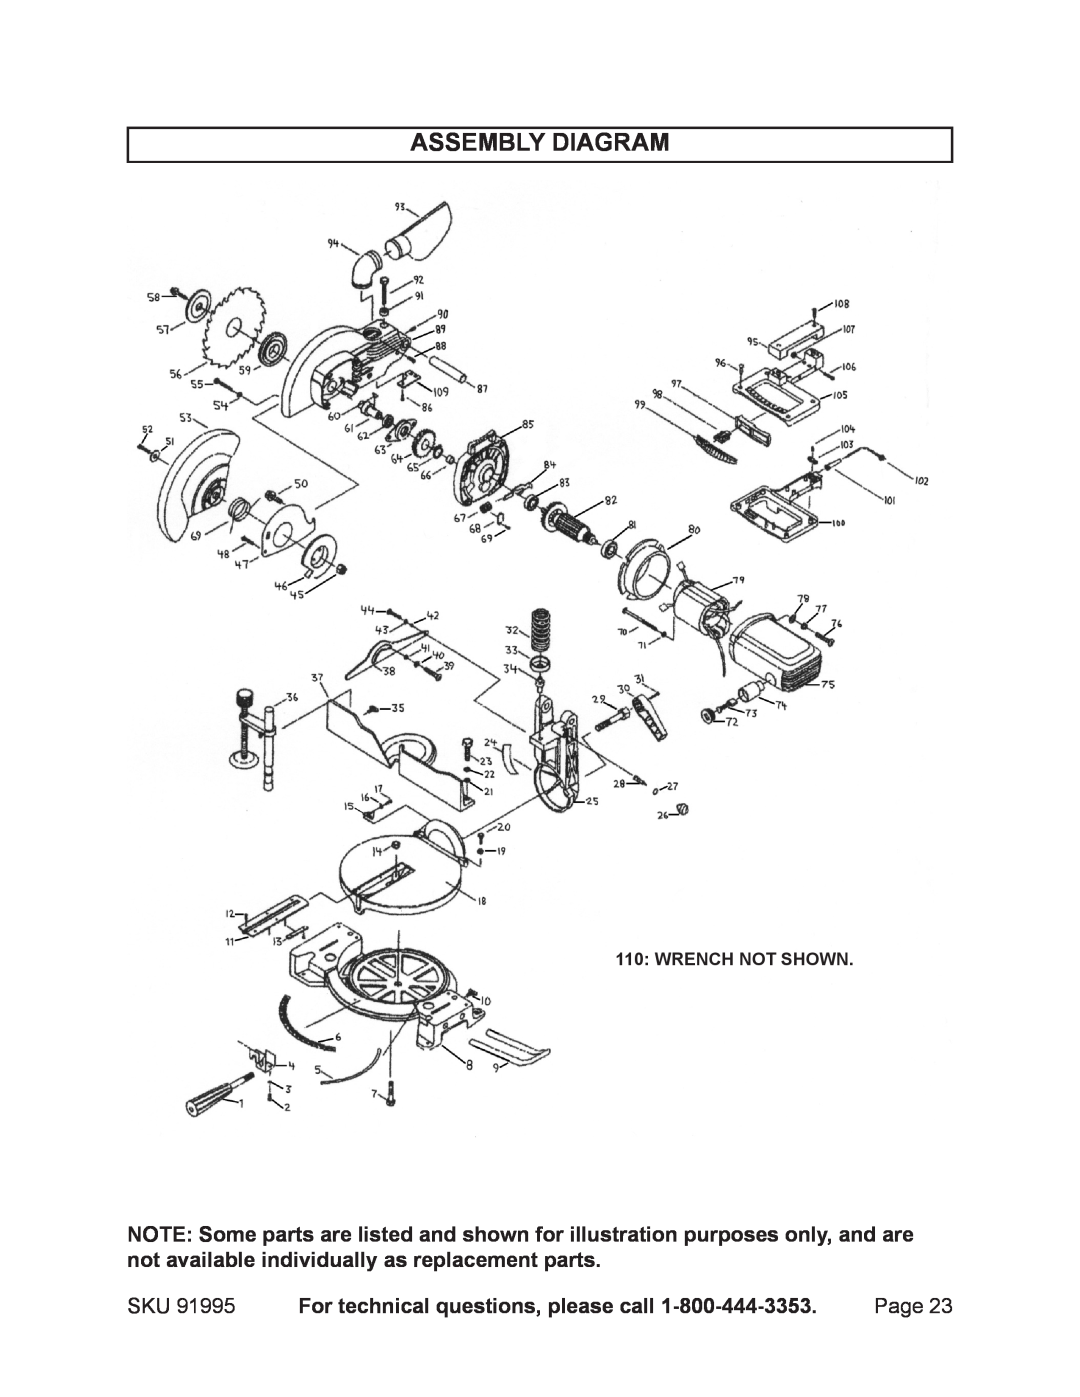 Chicago Electric 91995 operating instructions Assembly Diagram, For technical questions, please call, Wrench Not Shown 